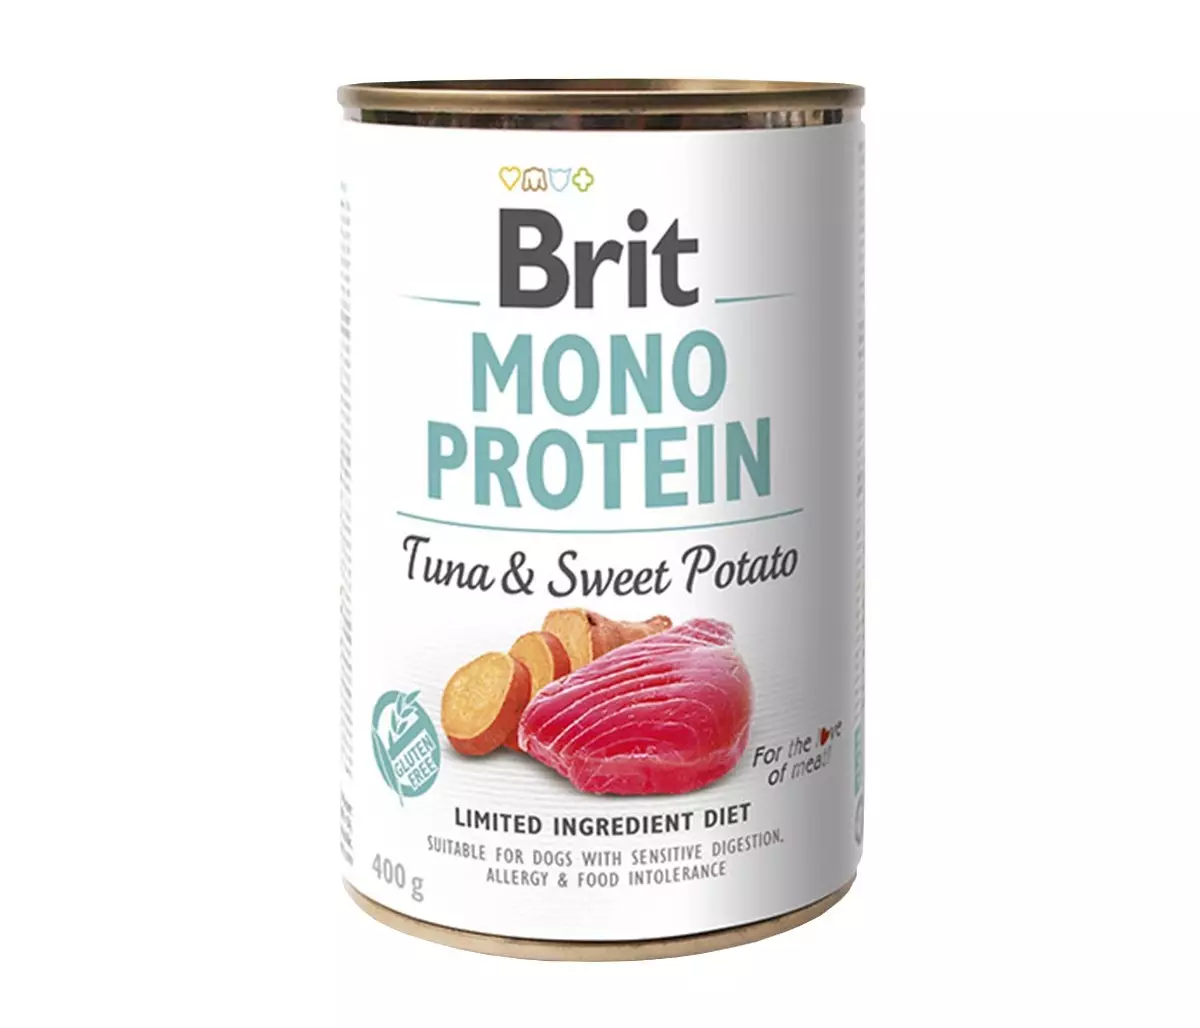 Canned food Brit: Wet food 850 g and other volume for adult dogs, reviews 21634_16